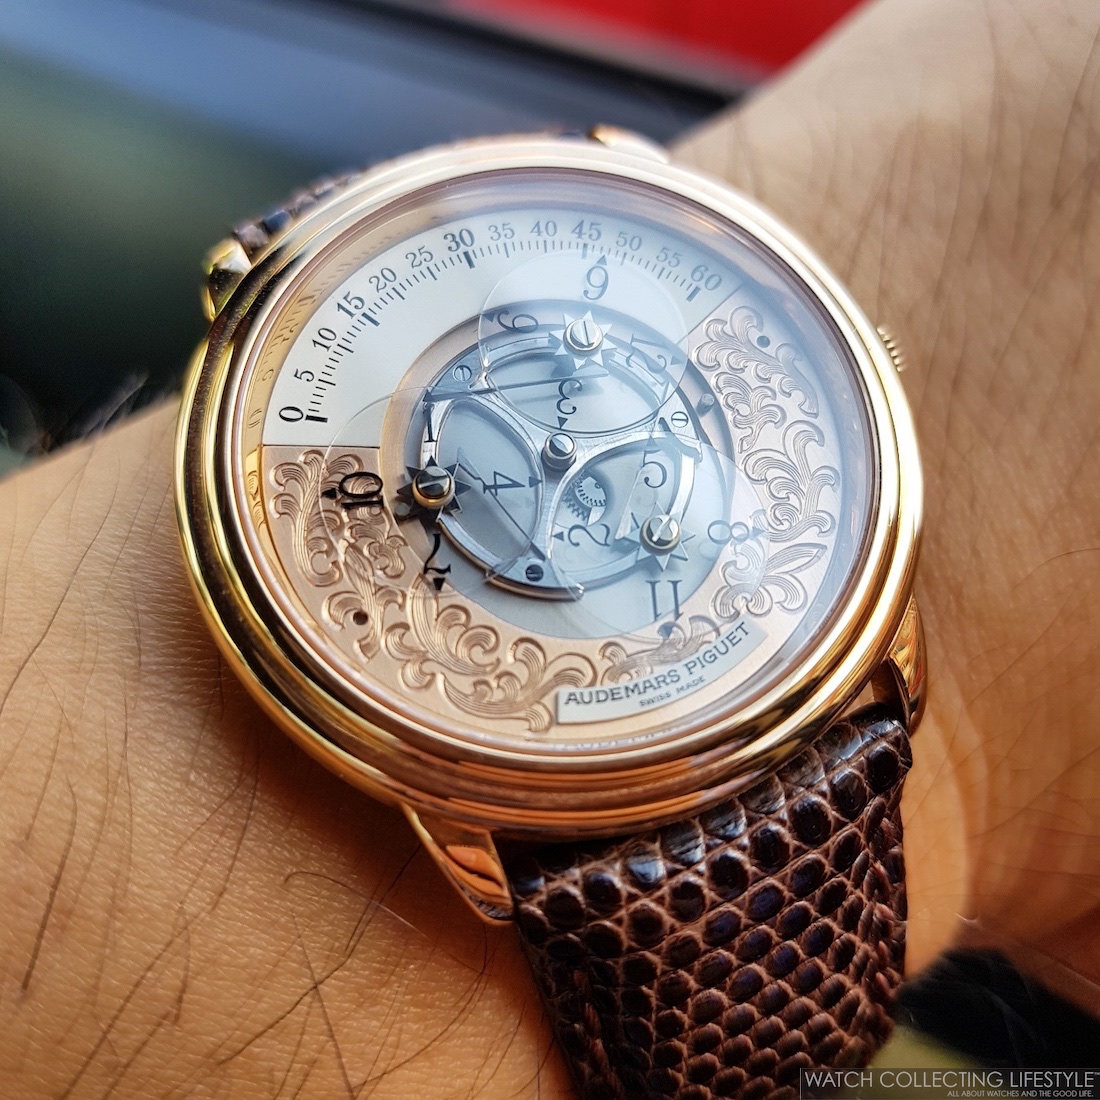 The Watch Collectors: @Orangedial17. Our Very Own IG Contributor in ...